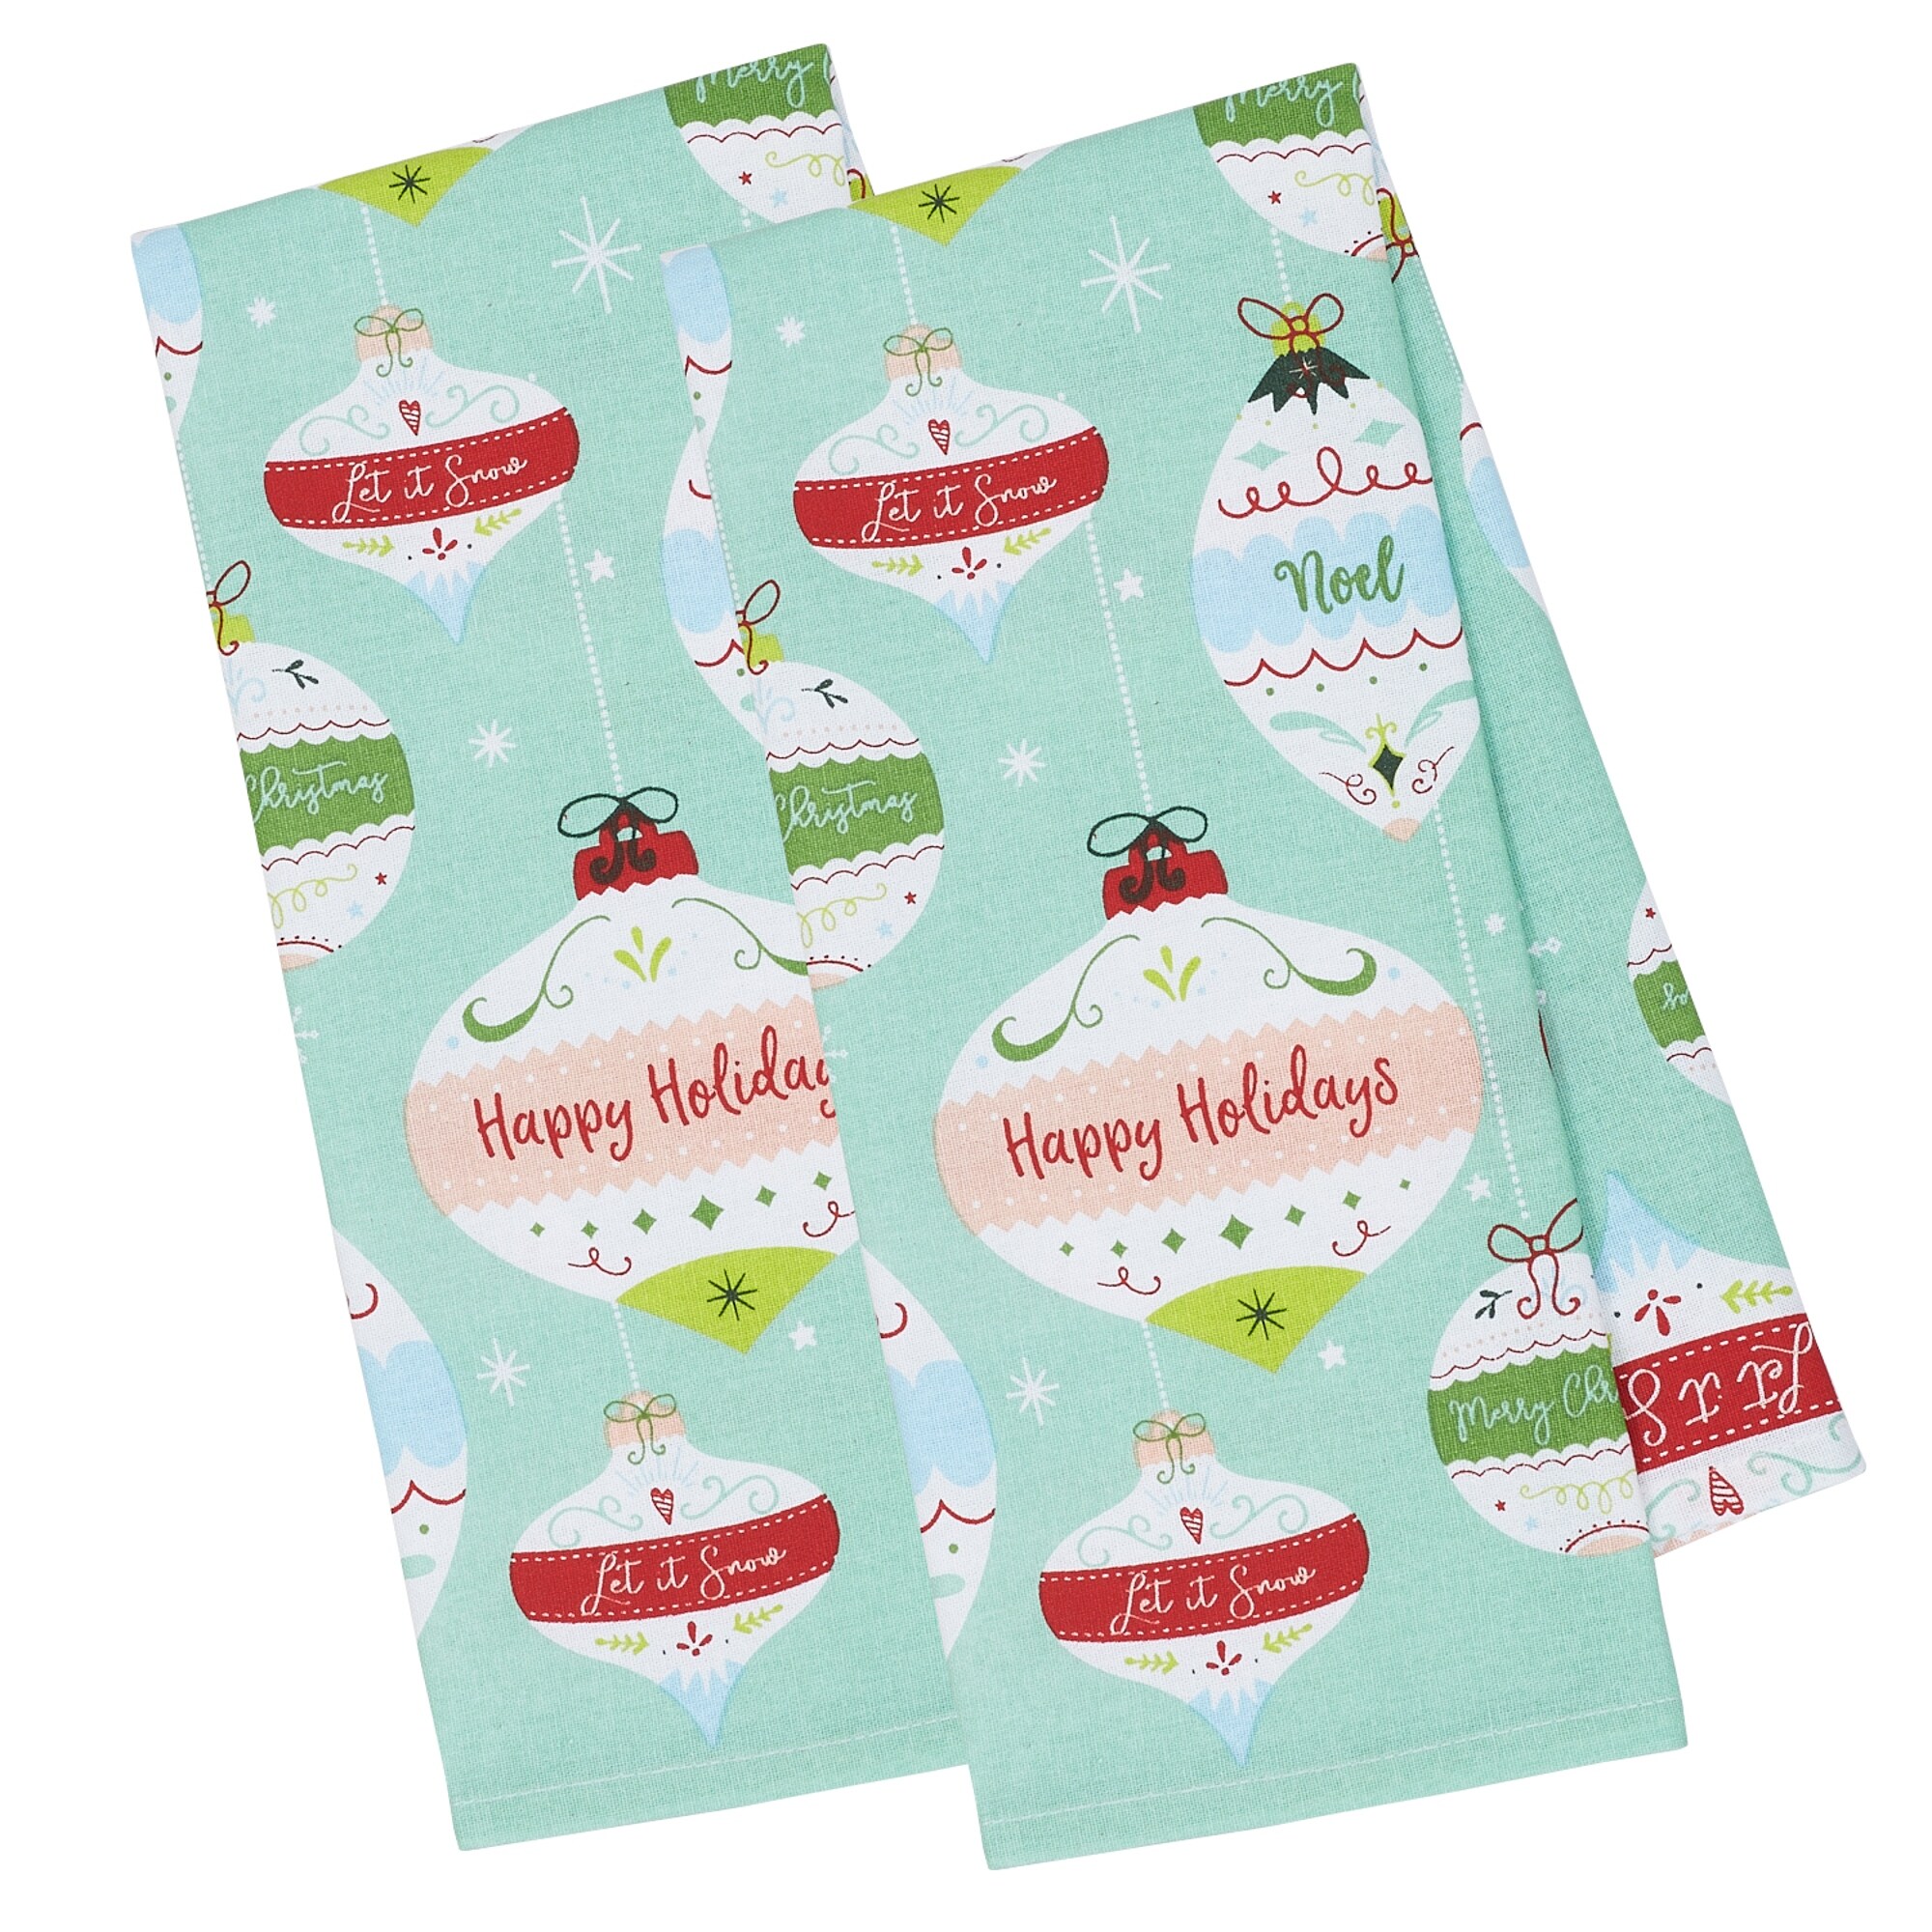 https://ak1.ostkcdn.com/images/products/is/images/direct/8f44941b555898a586ceea8b49c1c25a6fa8b80b/DII-Assorted-Noel-Printed-Dishtowel-%28Set-of-2%29.jpg